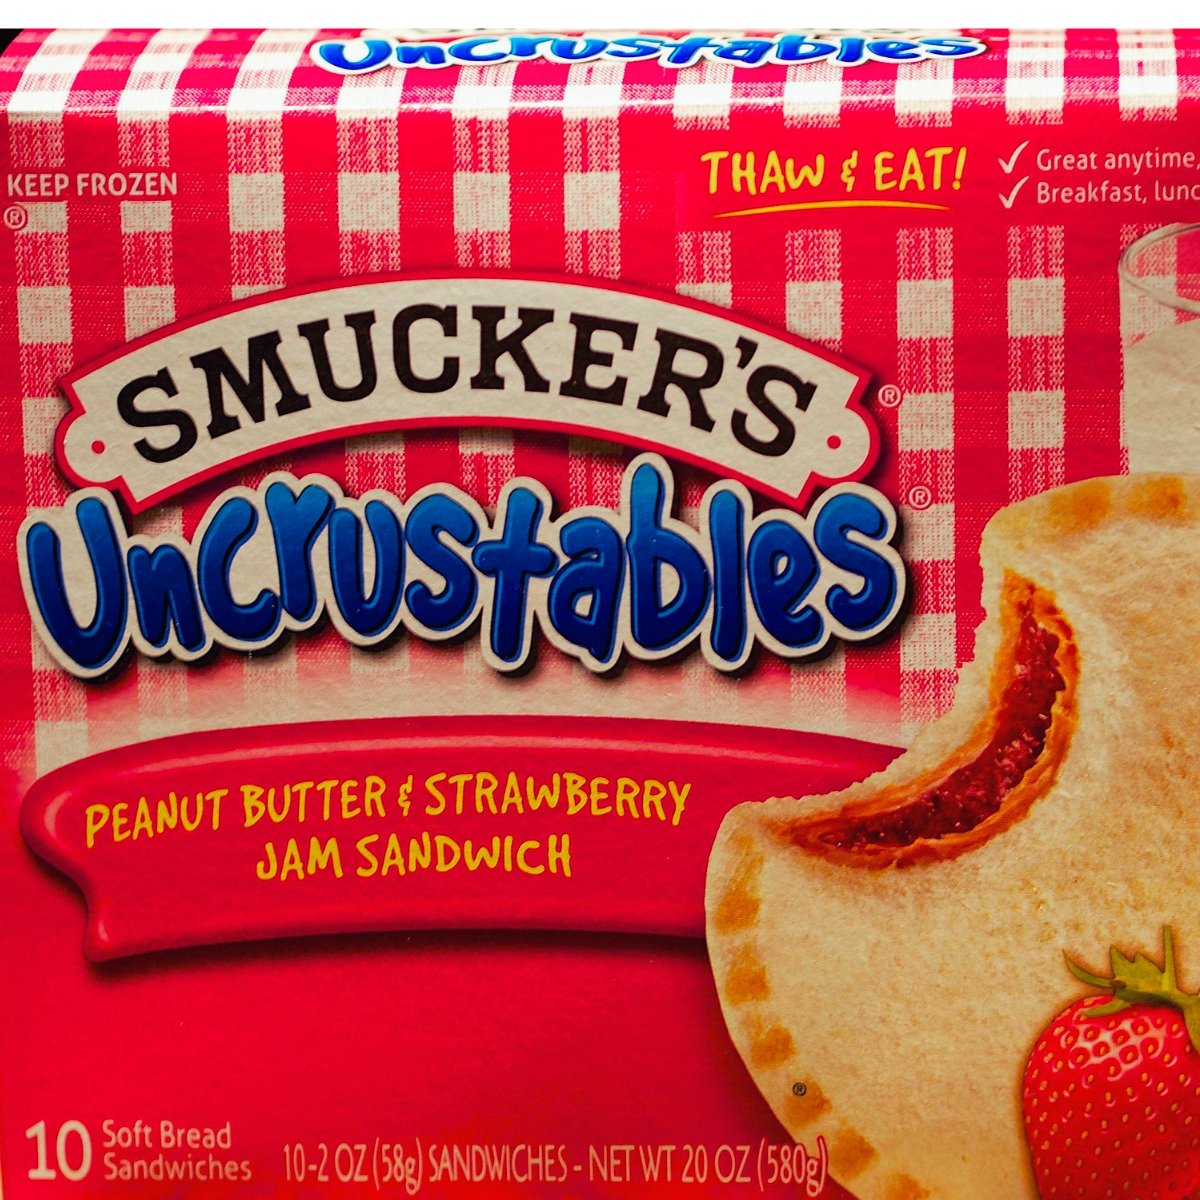 Smuckers Uncrustables peanut butter and strawberry jam sandwiches